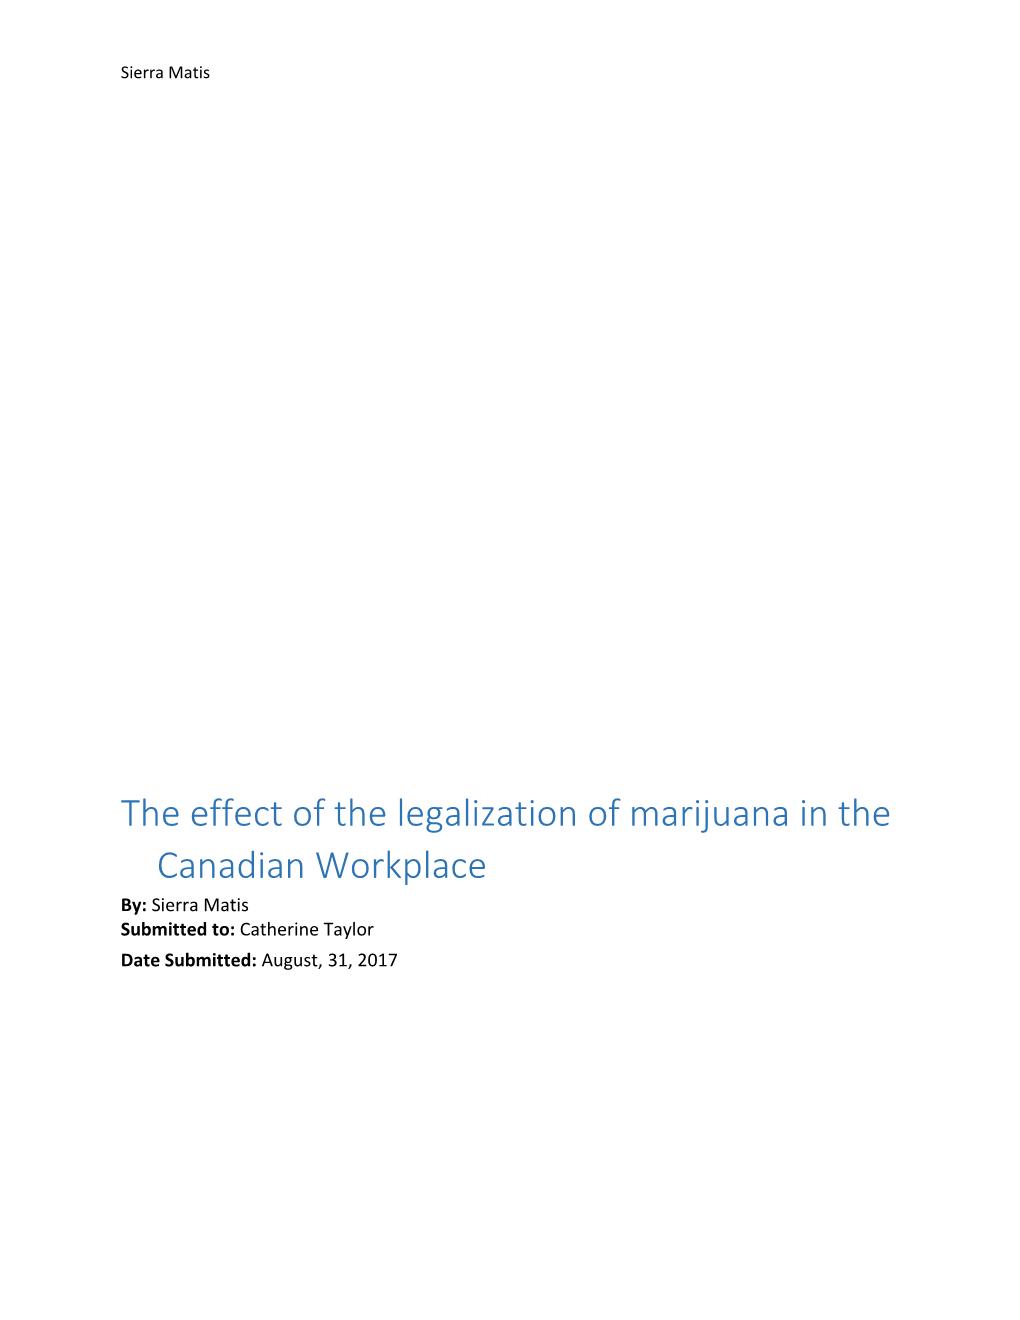 The Effect of the Legalization Ofmarijuana in the Canadian Workplace